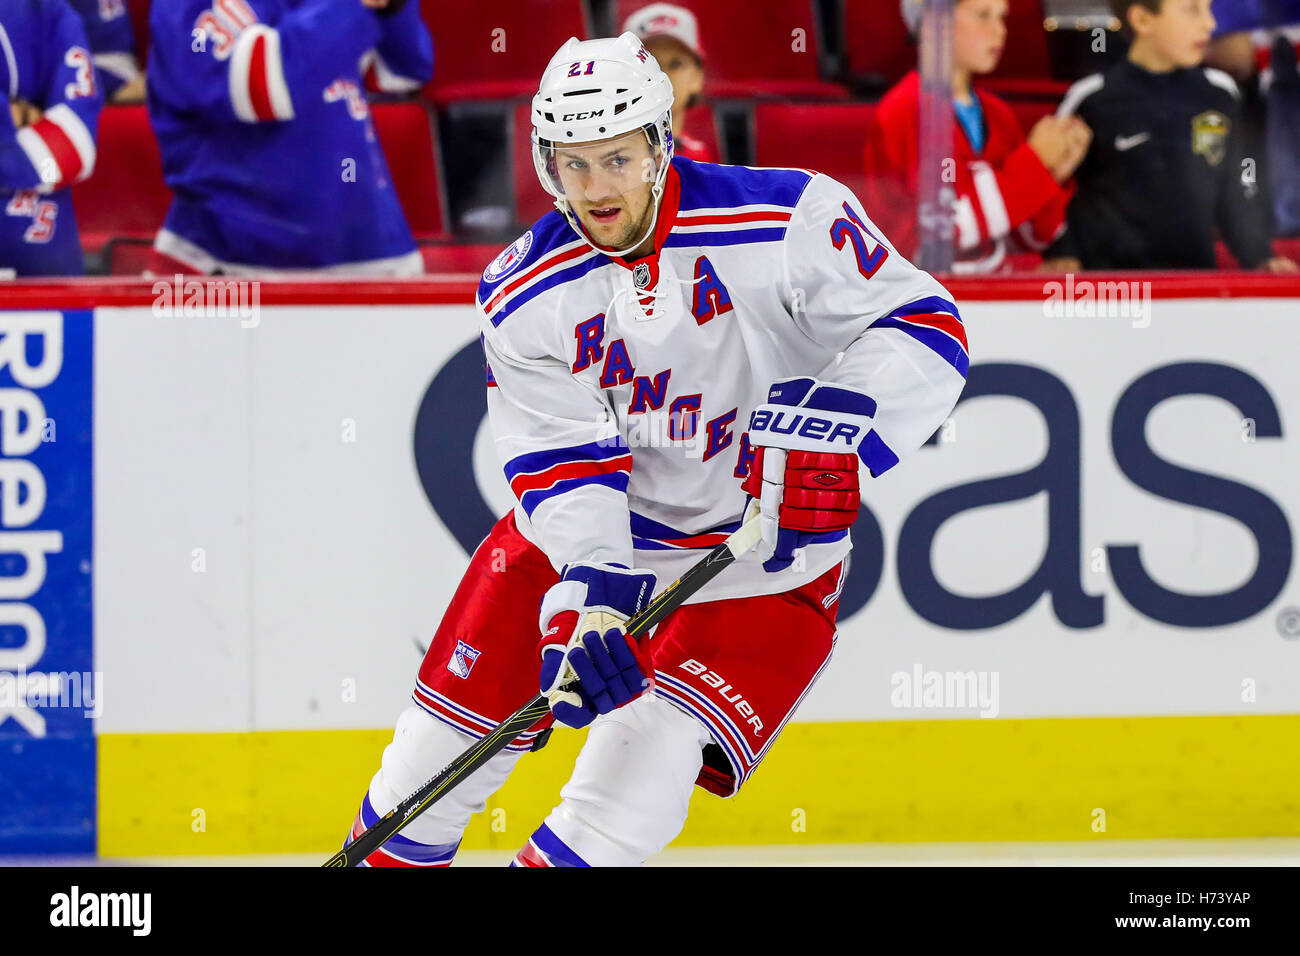 Raleigh, North Carolina, USA. 29th Oct, 2016. New York Rangers center Derek Stepan (21) during the NHL game between the New York Rangers and the Carolina Hurricanes at the PNC Arena. © Andy Martin Jr./ZUMA Wire/Alamy Live News Stock Photo